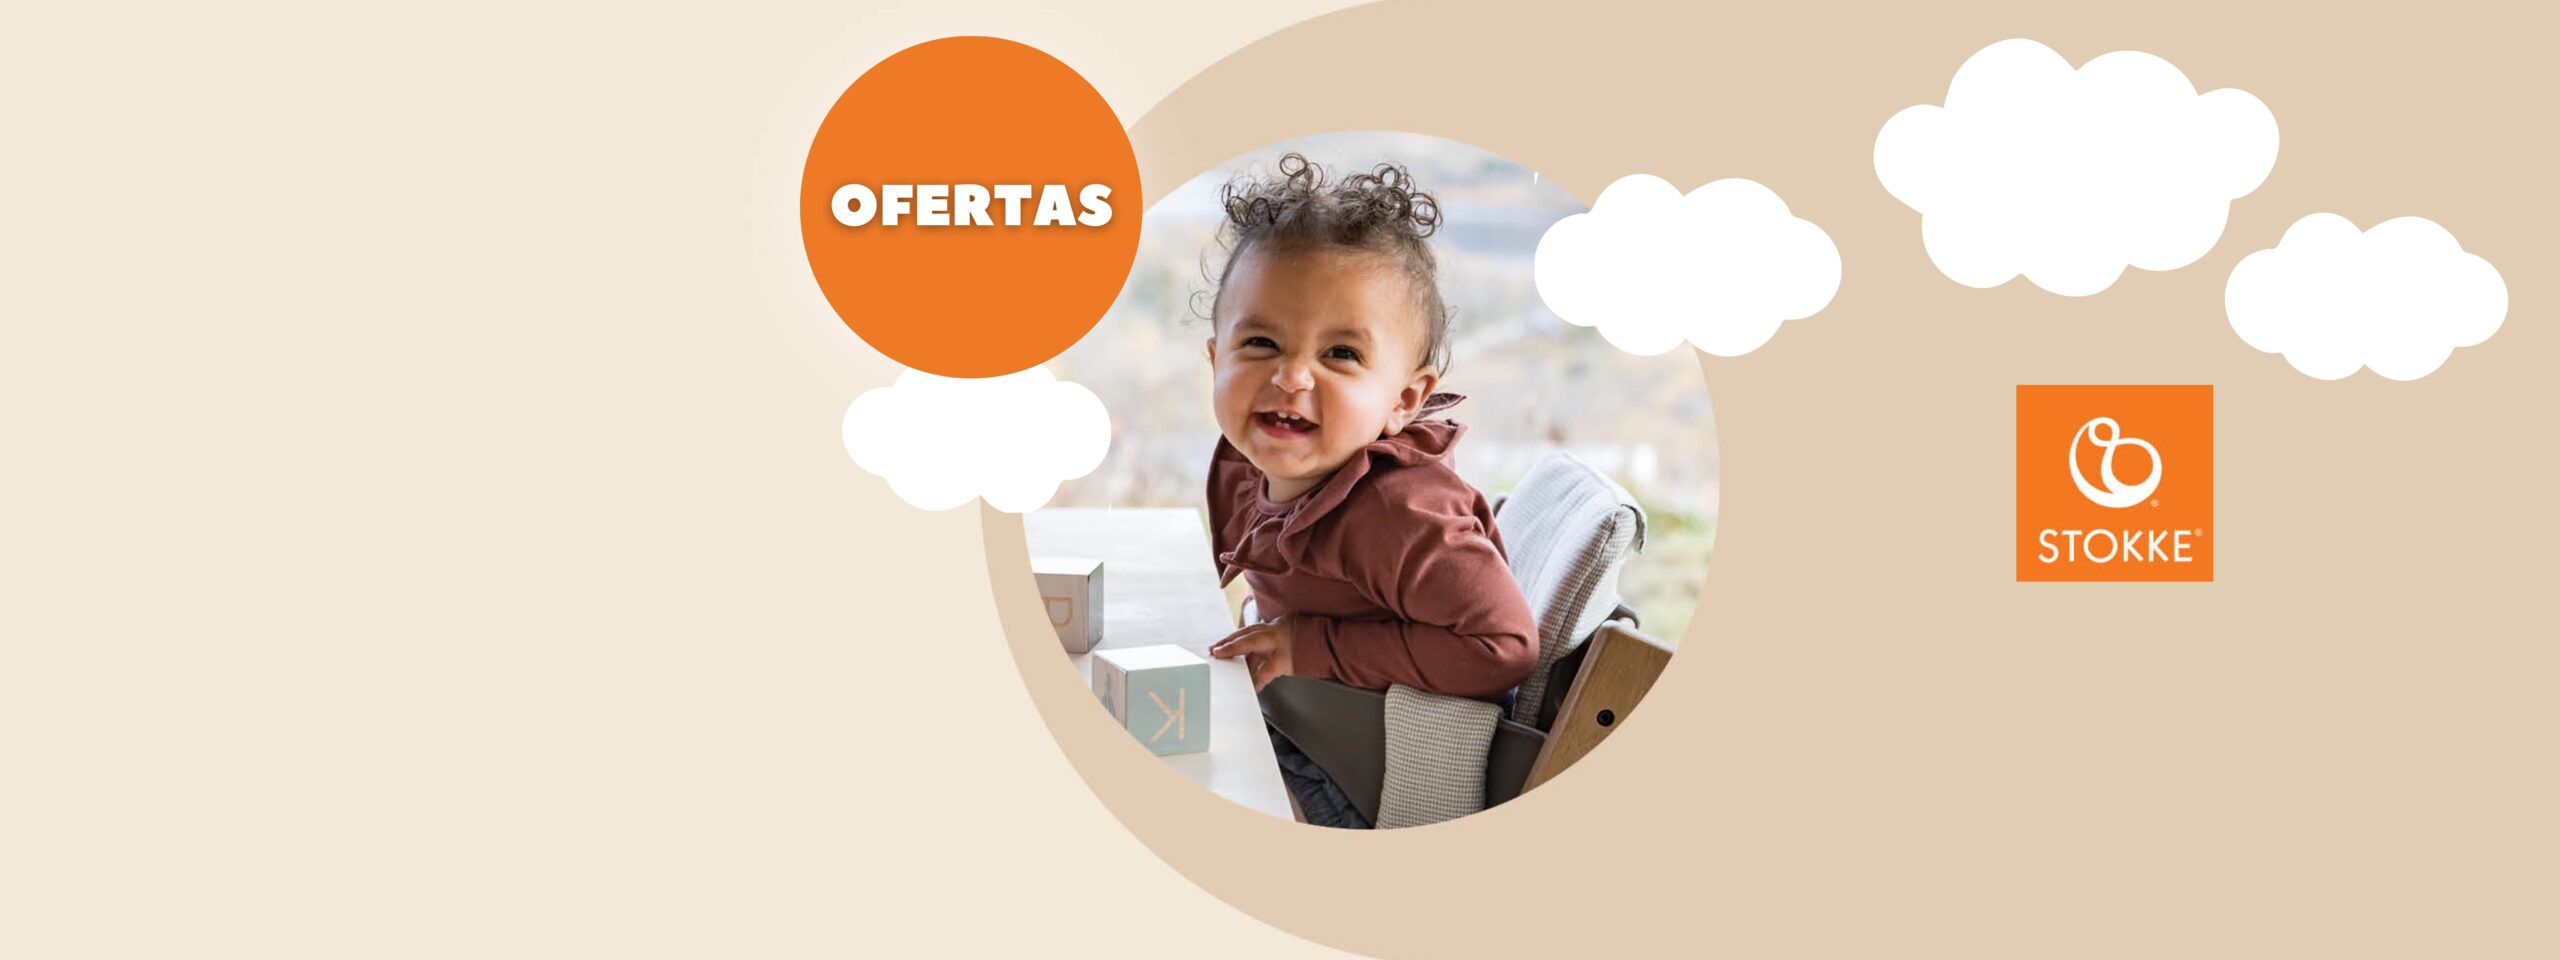 banners site_ofertas stokke fall